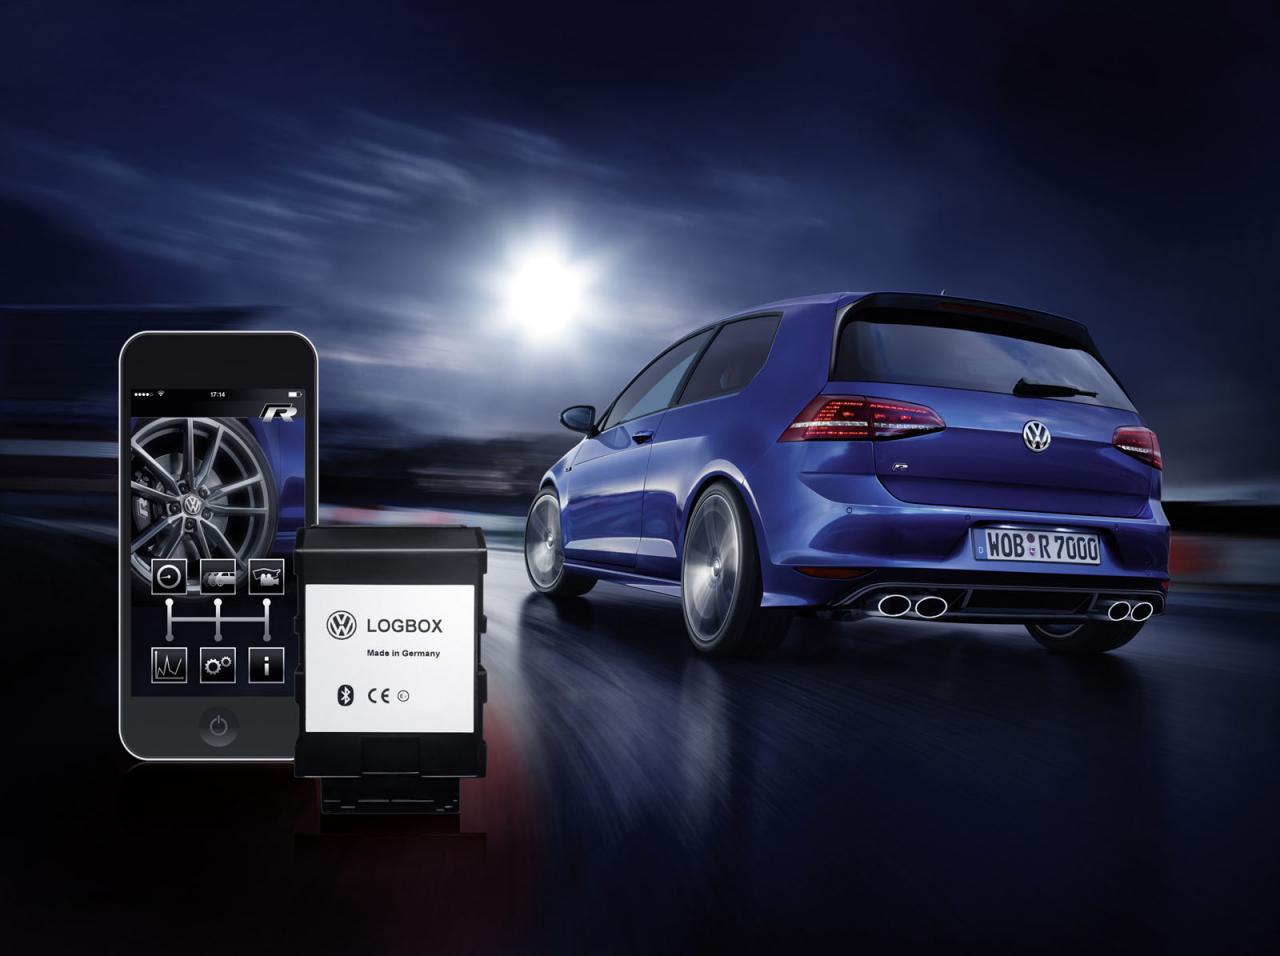 LogBox and Race App announced for Volkswagen Golf R (video)